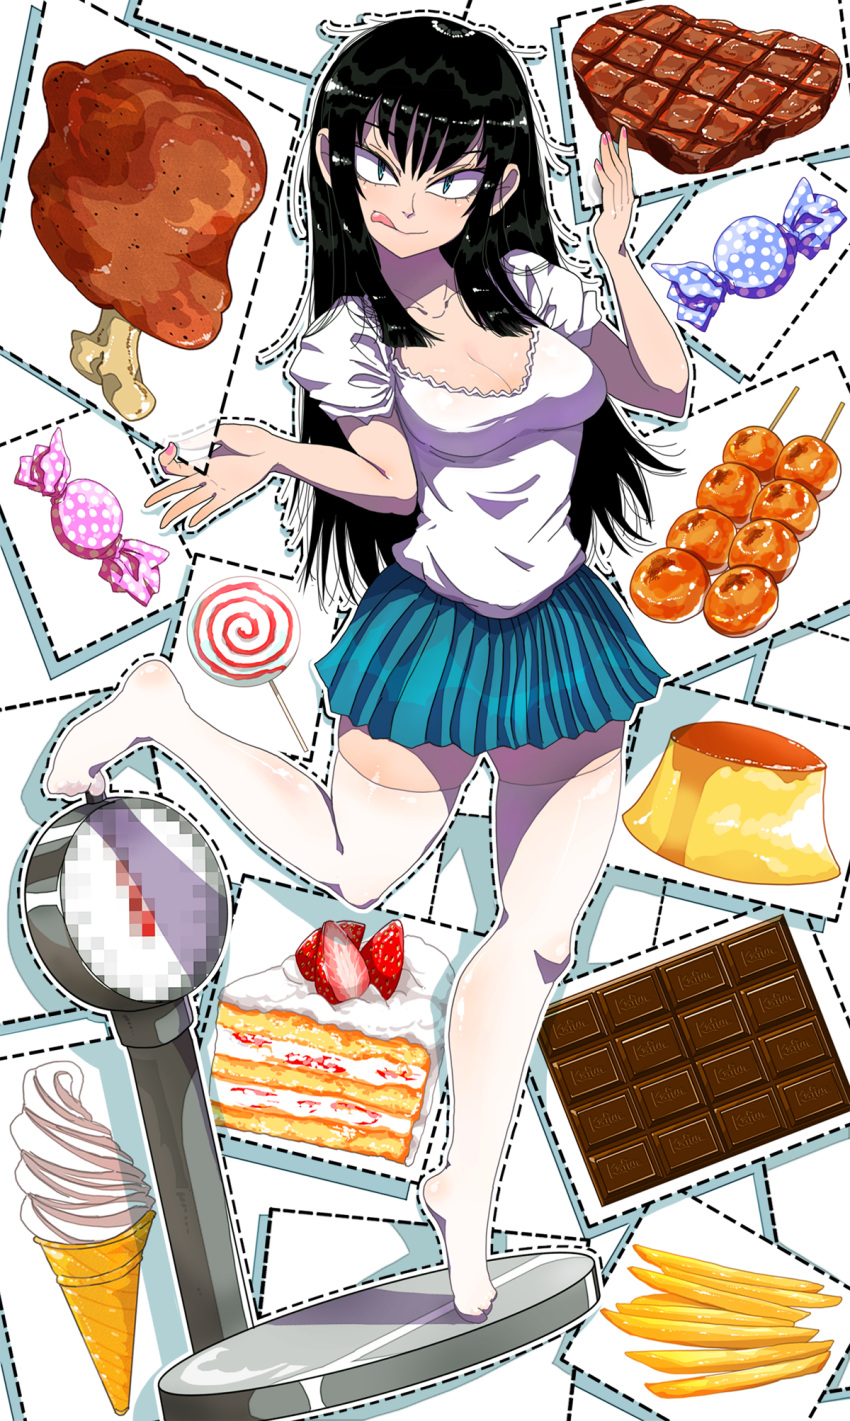 1girl :q bangs black_hair blouse blue_eyes blue_skirt boned_meat breasts cake candy censored chicken_leg chocolate chocolate_bar cleavage dango dotted_line food french_fries full_body highres ice_cream ice_cream_cone kafun lollipop long_hair looking_at_viewer meat medium_breasts miniskirt mitarashi_dango mosaic_censoring nail_polish no_shoes ok_sign original pink_nails pleated_skirt pudding sanpaku short_sleeves skirt slice_of_cake smile soft_serve solo standing standing_on_one_leg steak strawberry_shortcake swirl_lollipop thighhighs tiptoes tongue tongue_out tsurime w_arms wagashi weighing_scale white_blouse white_legwear wrapped_candy zettai_ryouiki